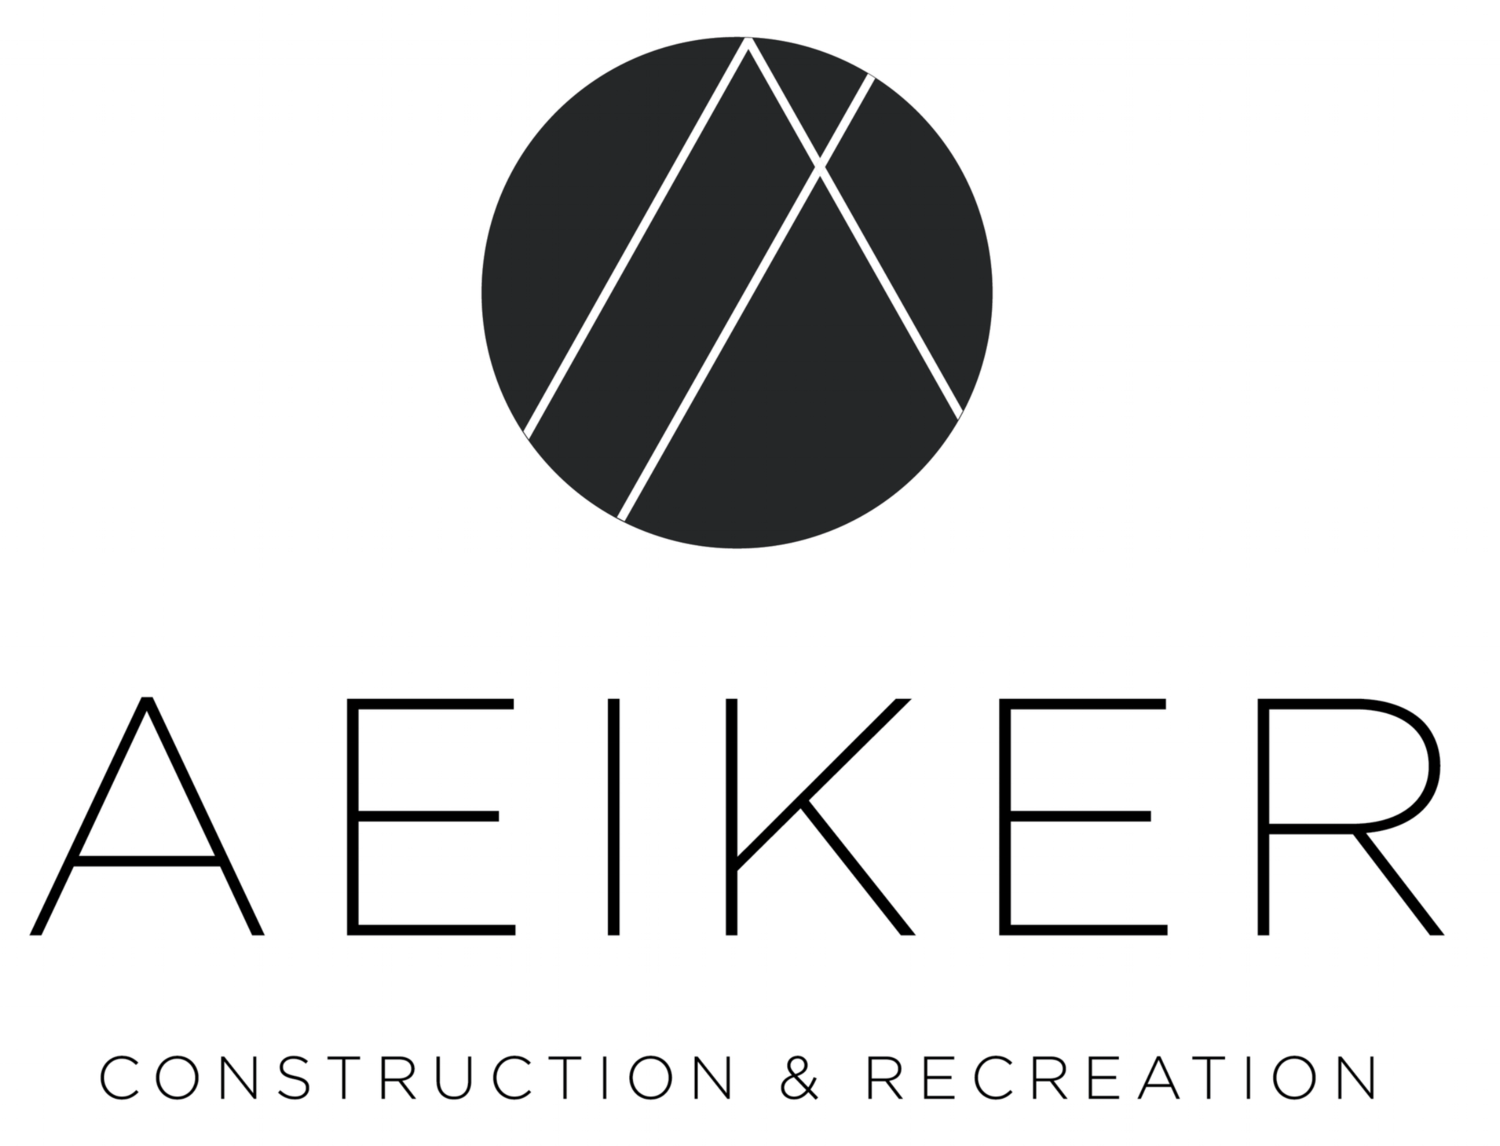 Aeiker Construction and Recreation